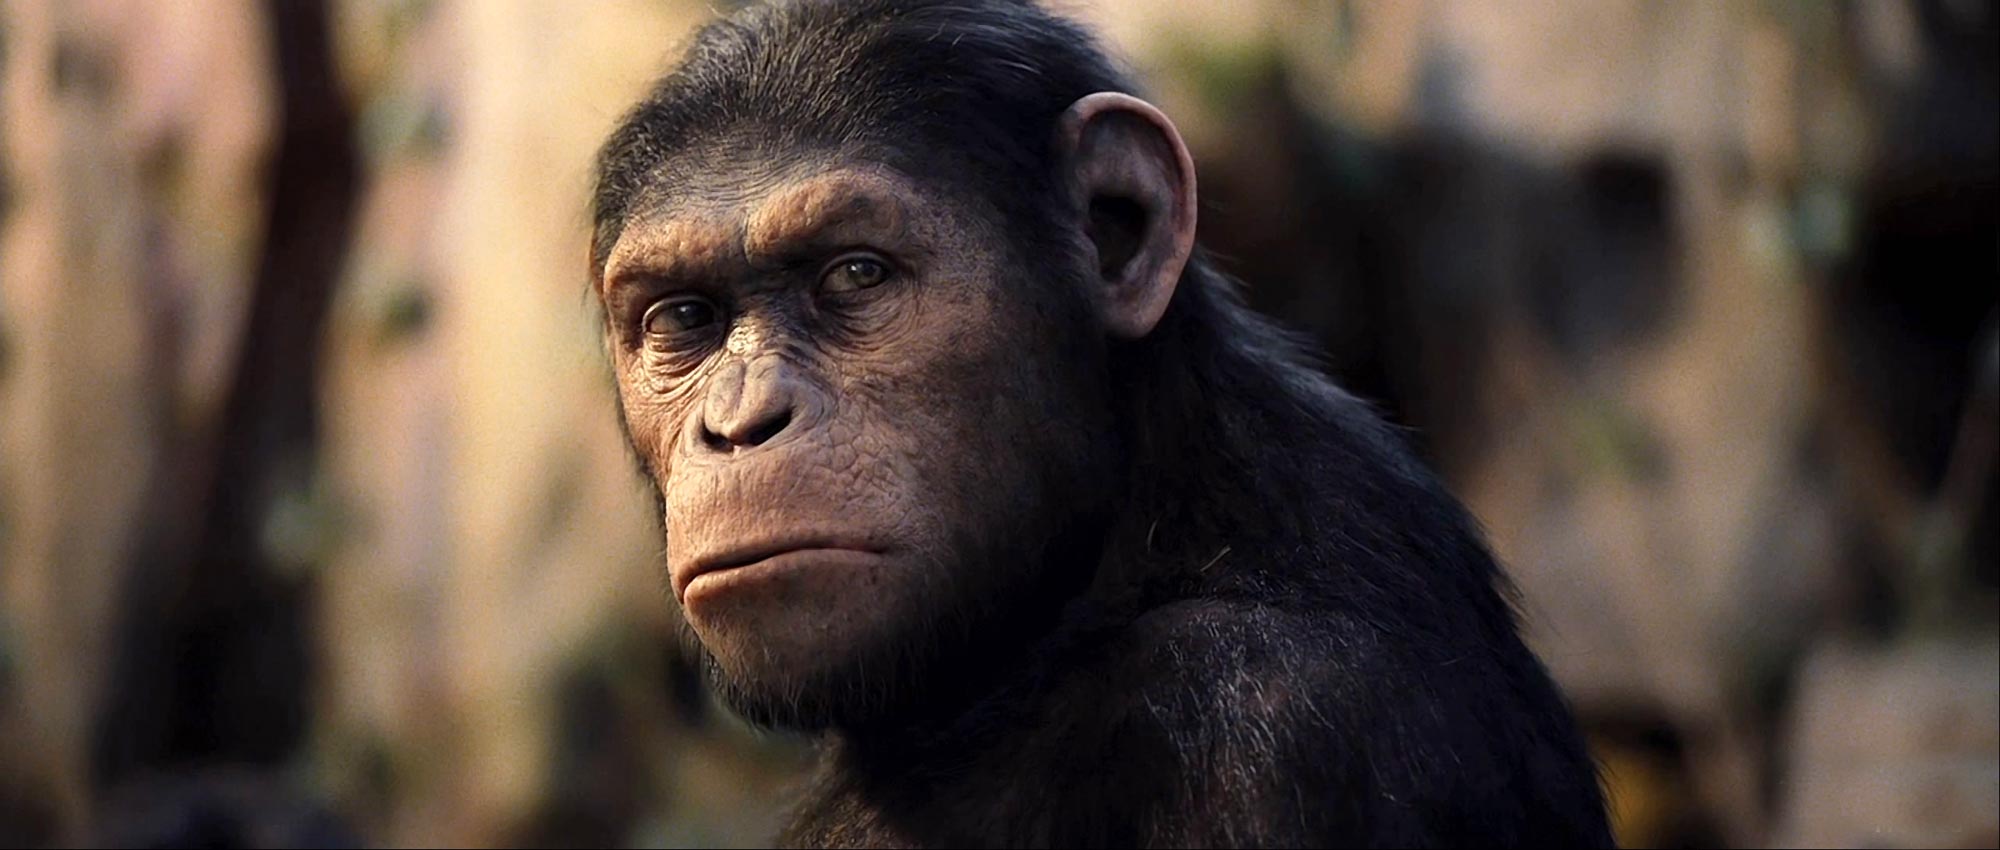 Dawn Of The Planet Of The Apes Unrated